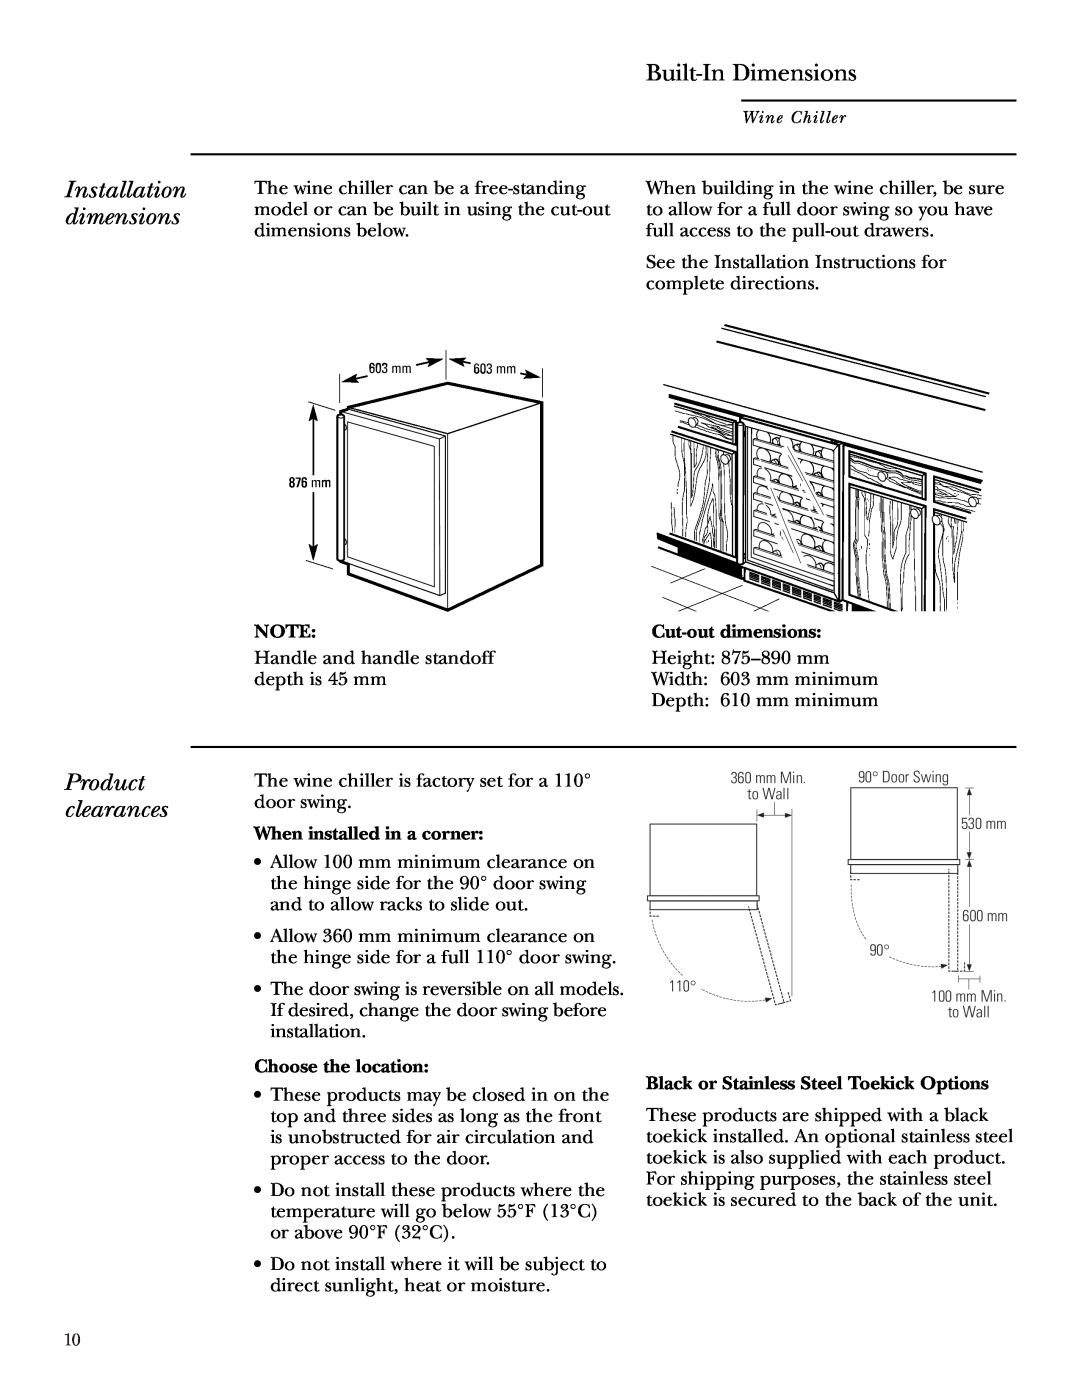 GE Monogram ZDWG240 owner manual Installation dimensions, Built-In Dimensions, Product clearances, Cut-out dimensions 